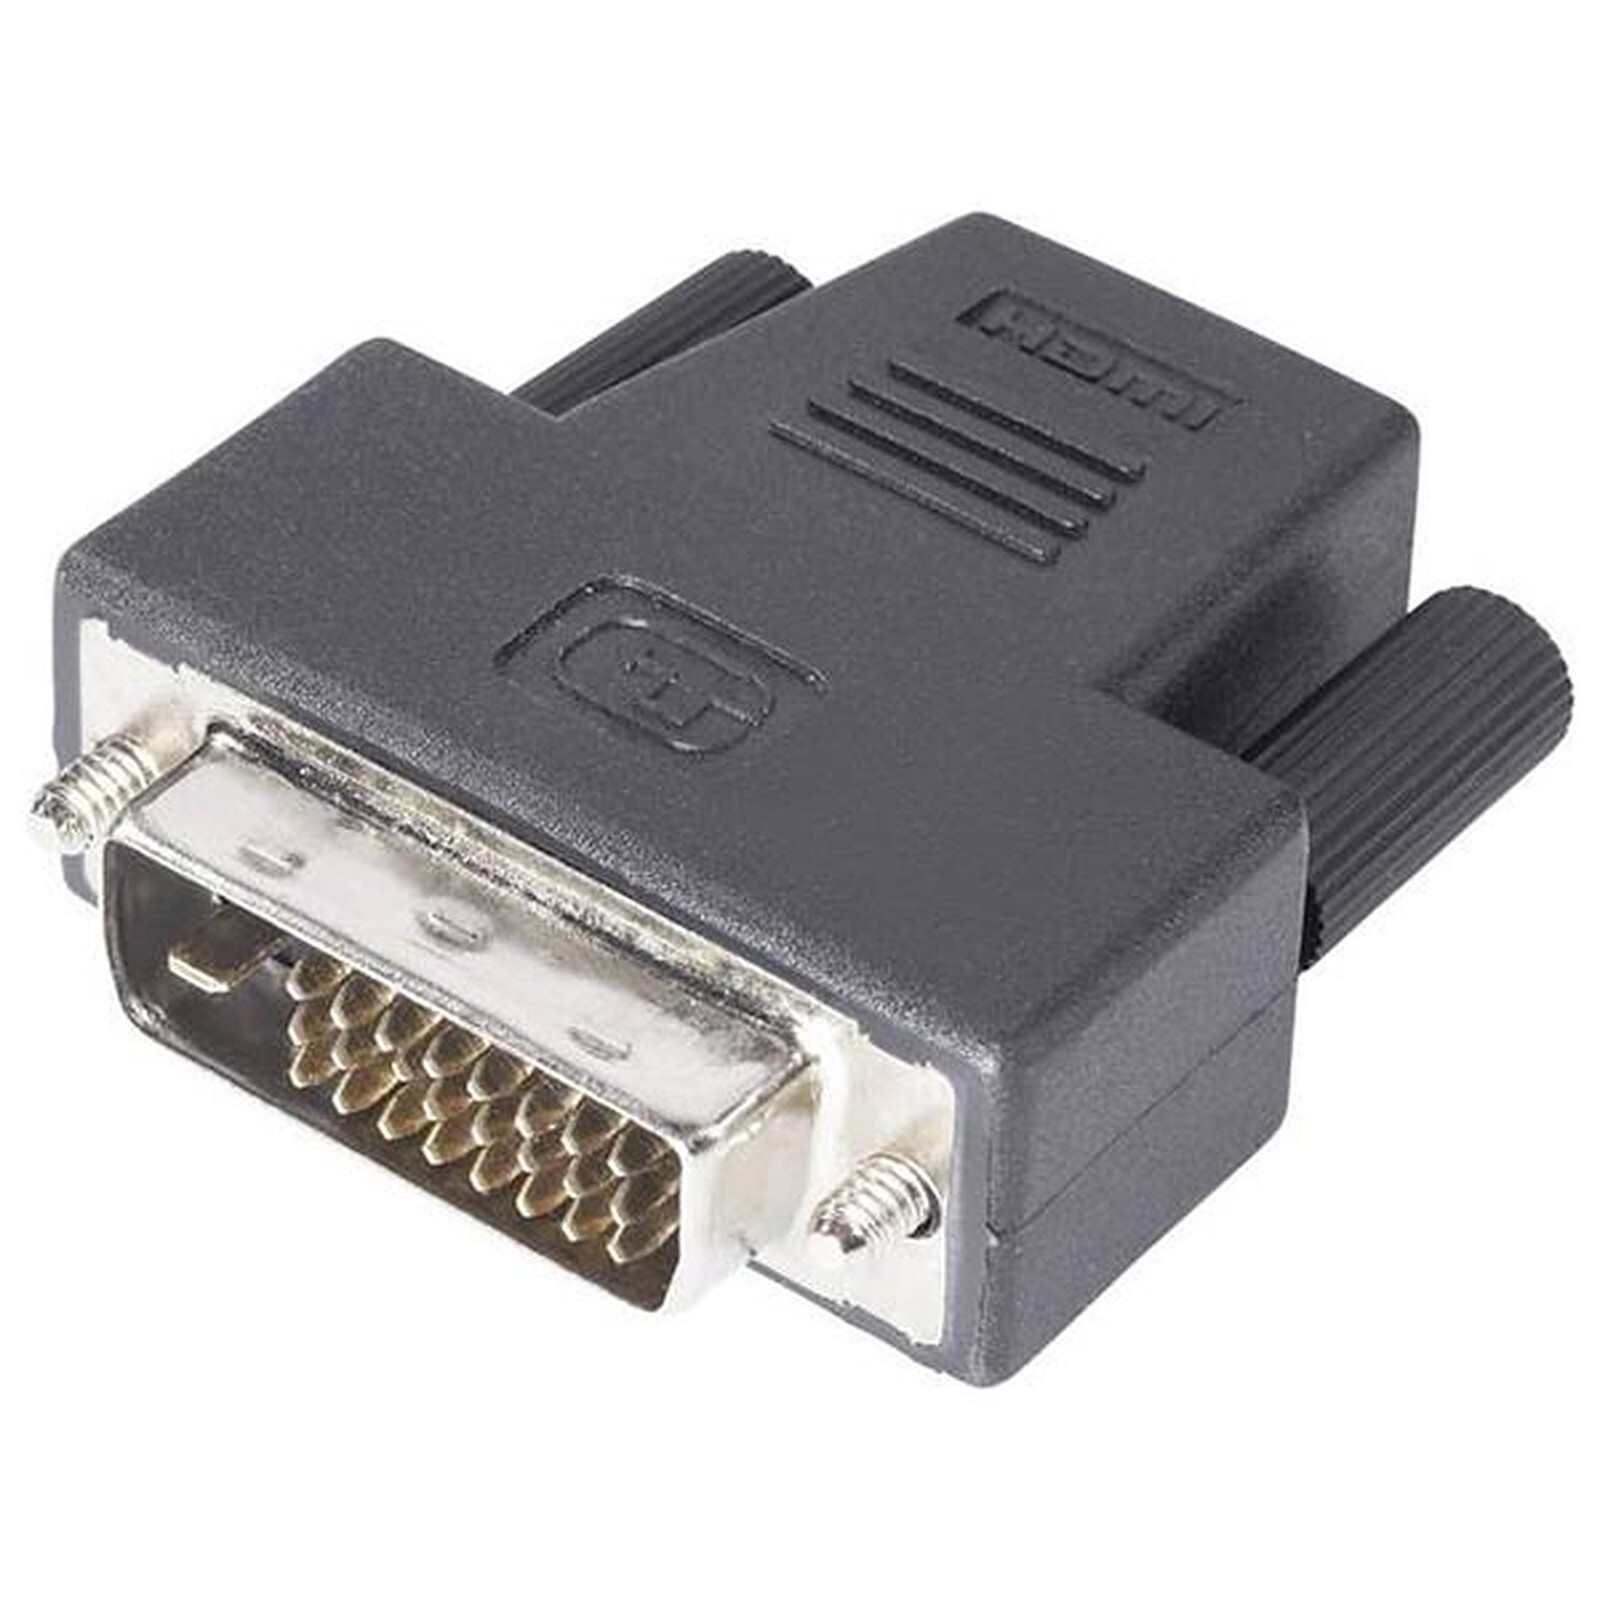 GENERIC DVI-D SINGLE LINK MALE TO HDMI FEMALE AUDIO/VIDEO ADAPTER 